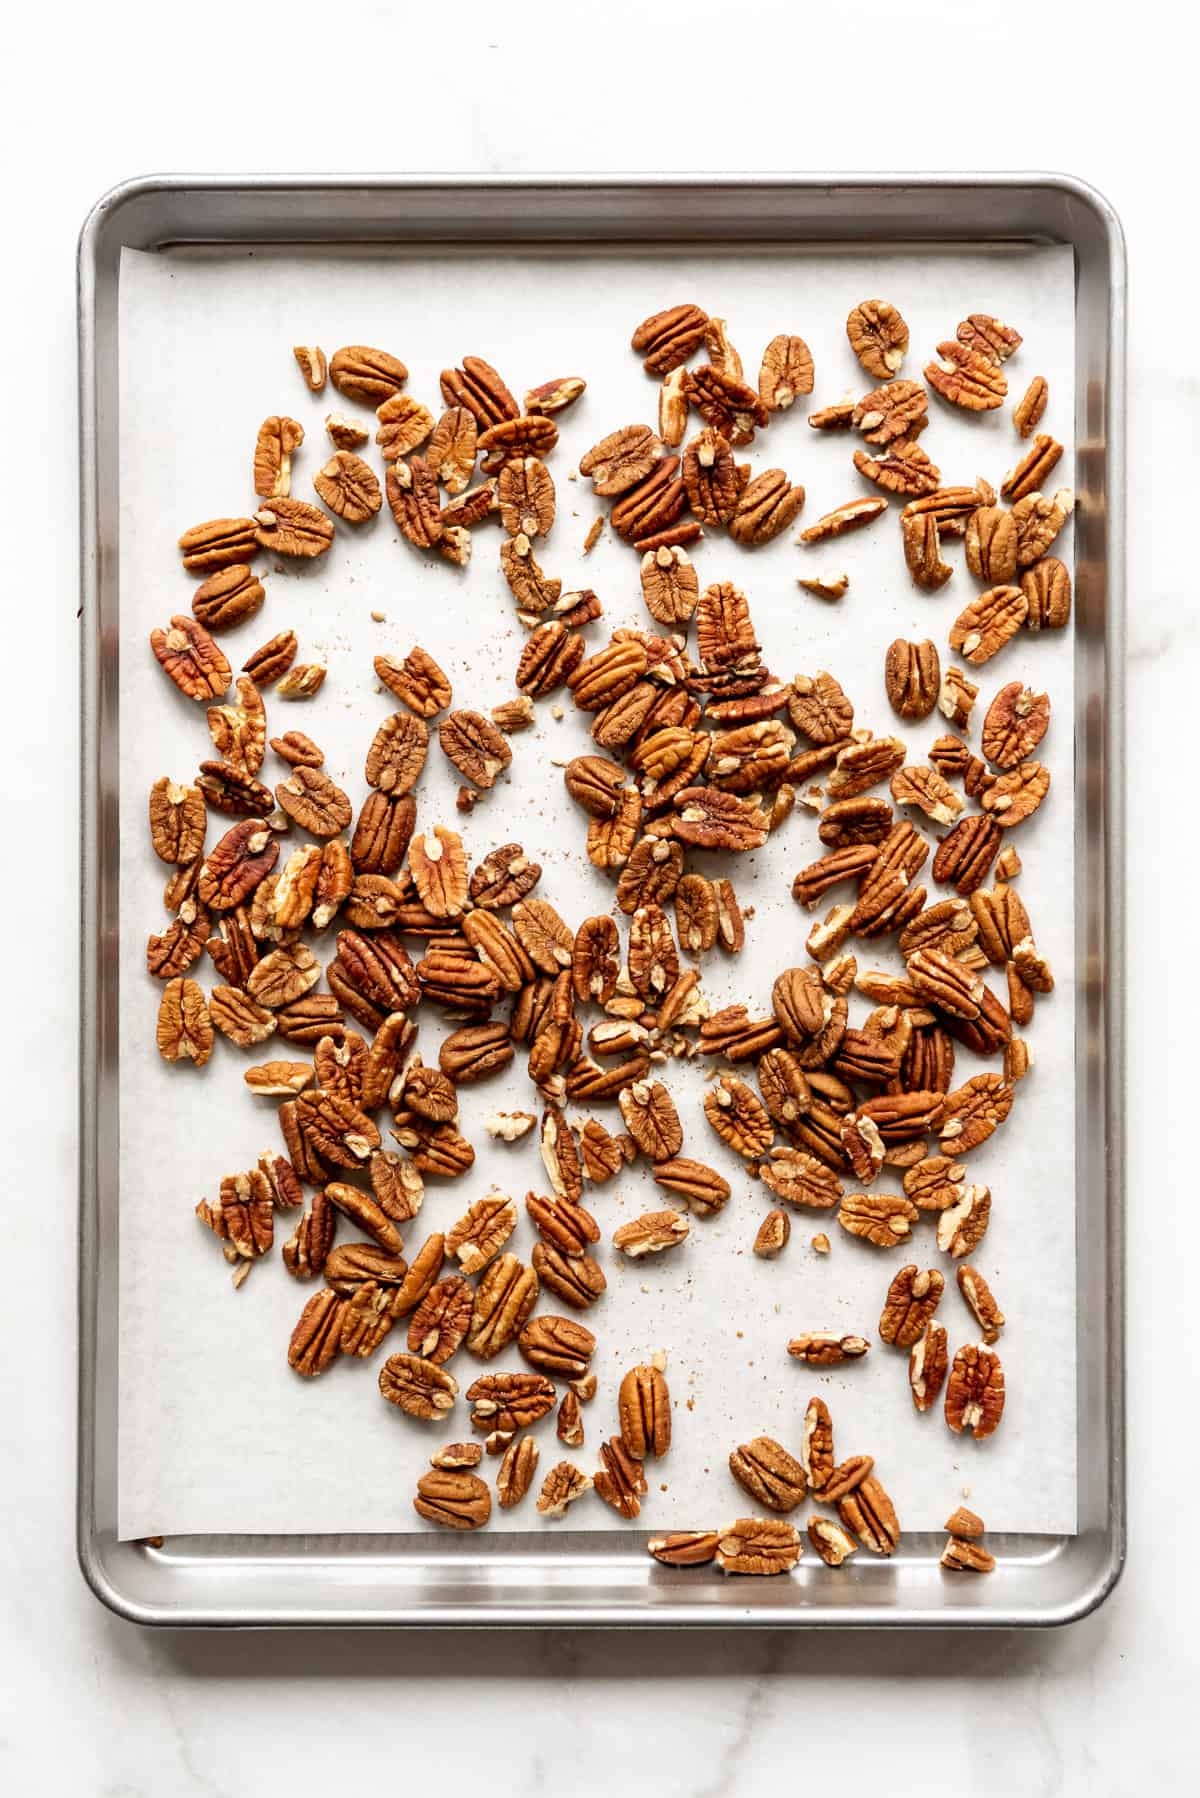 Whole pecans on a baking sheet for toasting.